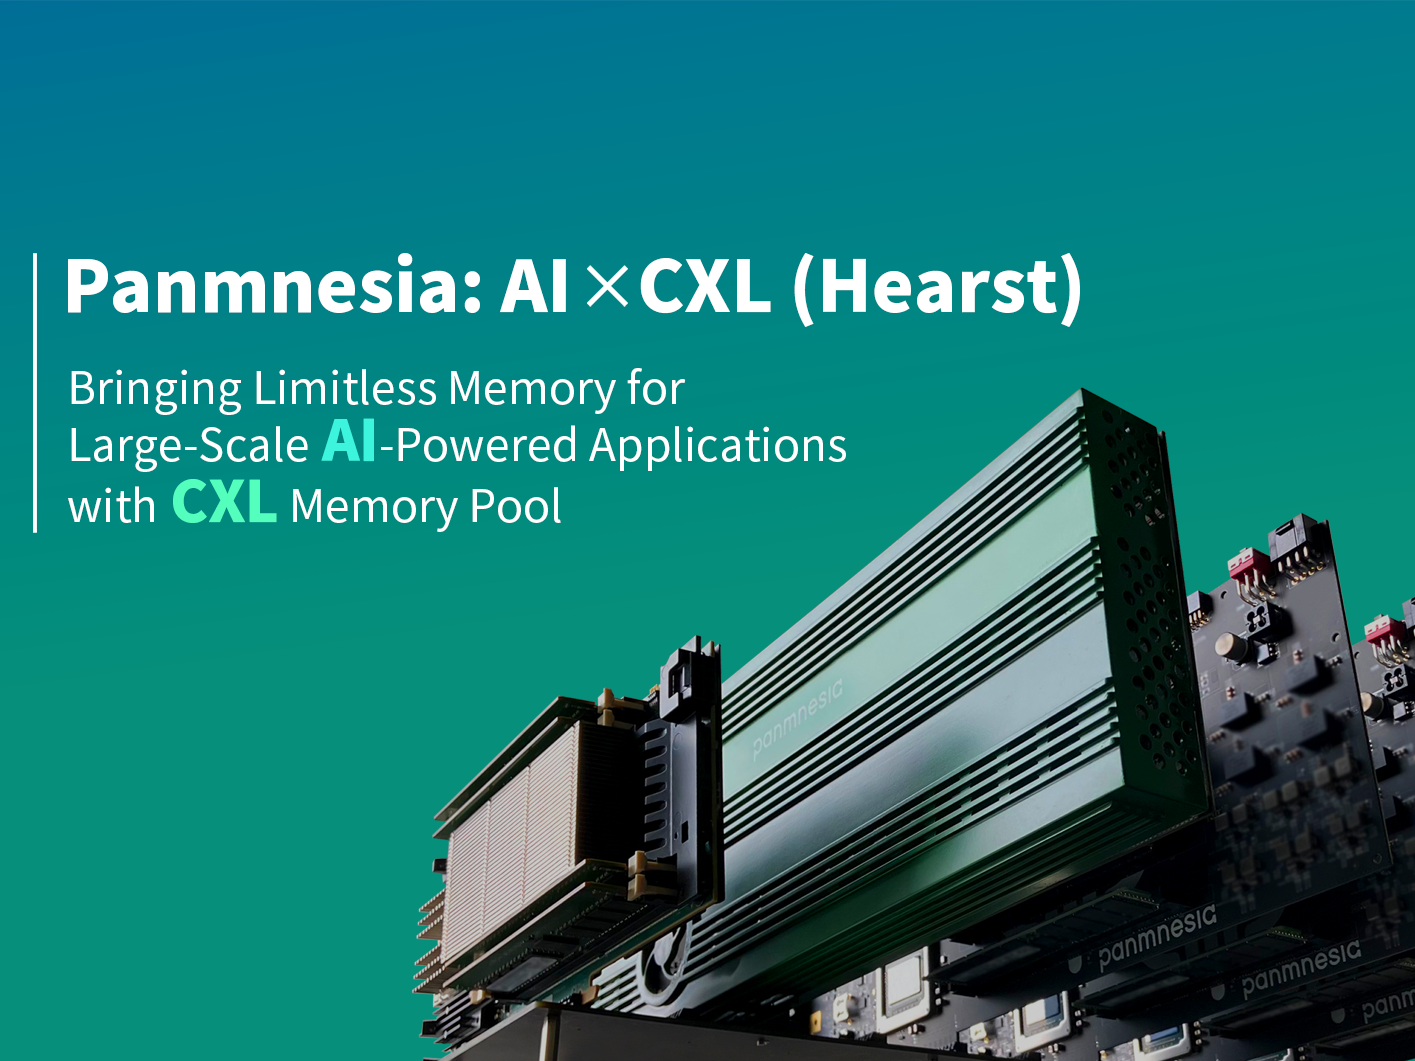 Hearst - Panmnesia's CXL Solution for AI Acceleration